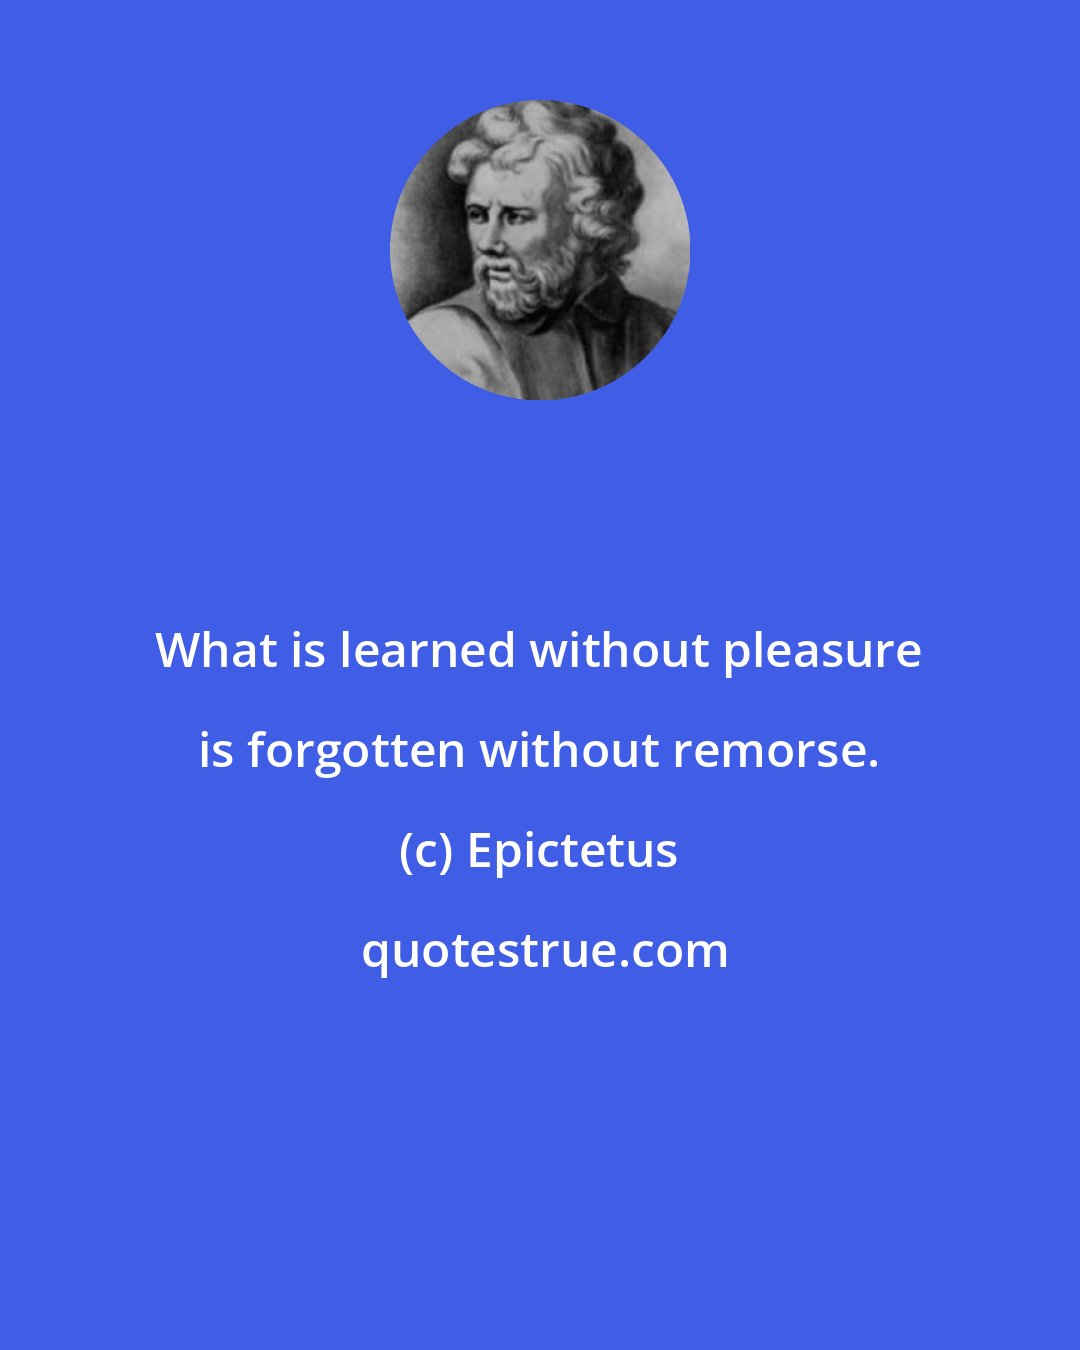 Epictetus: What is learned without pleasure is forgotten without remorse.